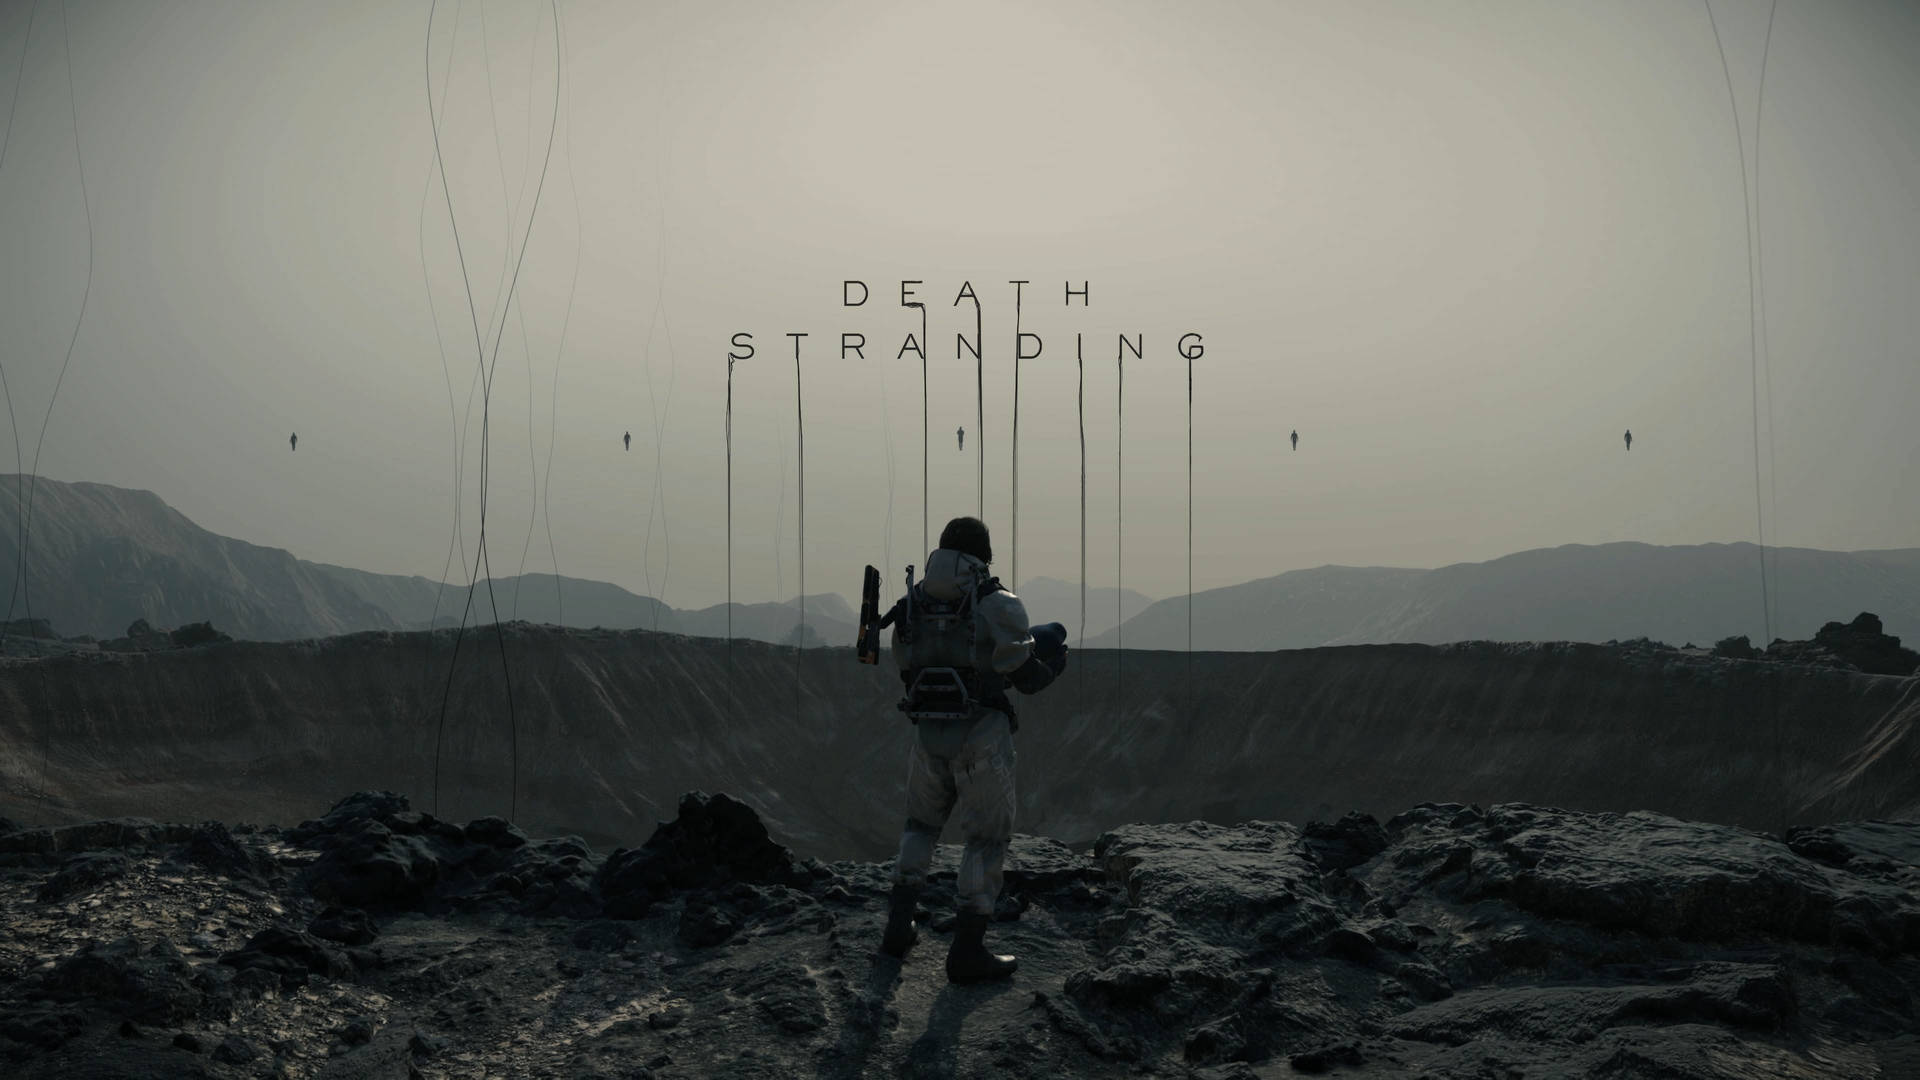 Bt's On The Crater Death Stranding